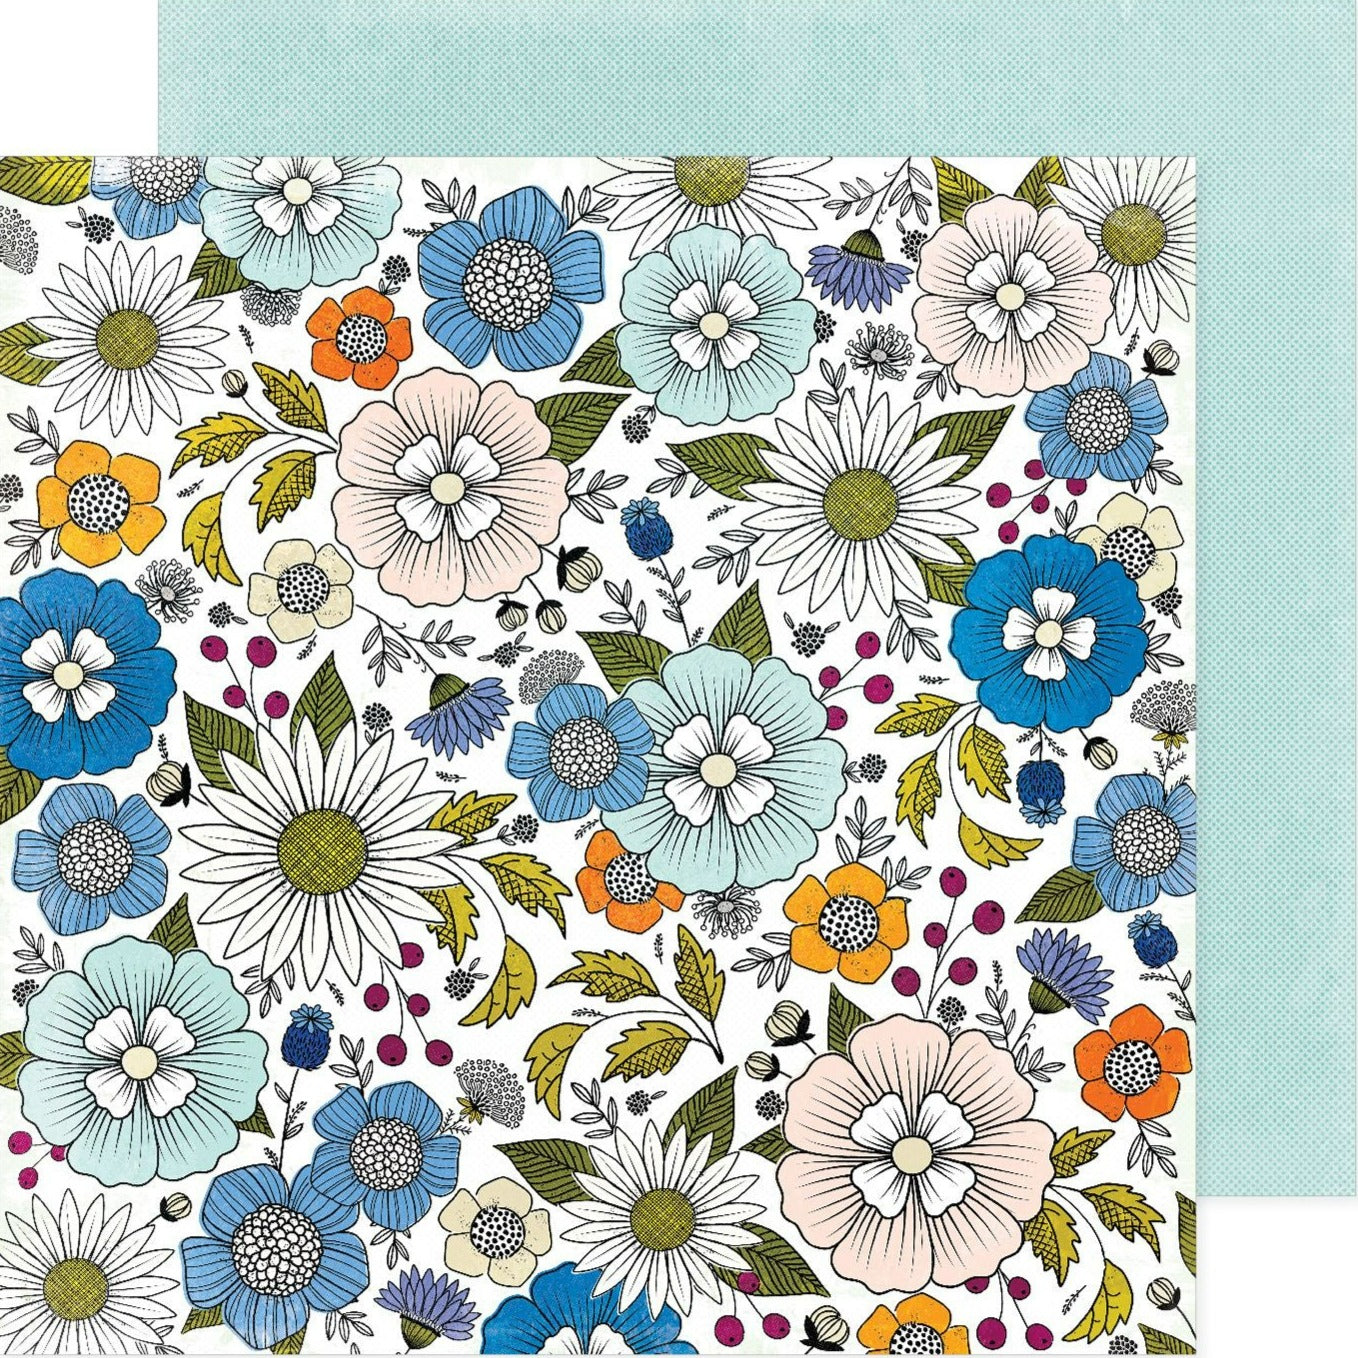 12x12 patterned cardstock. (Side A - beautiful floral in multiple colors on a white background; Side B - blue microdots on a teal blue background) - Archival-safe and acid-free from American Crafts